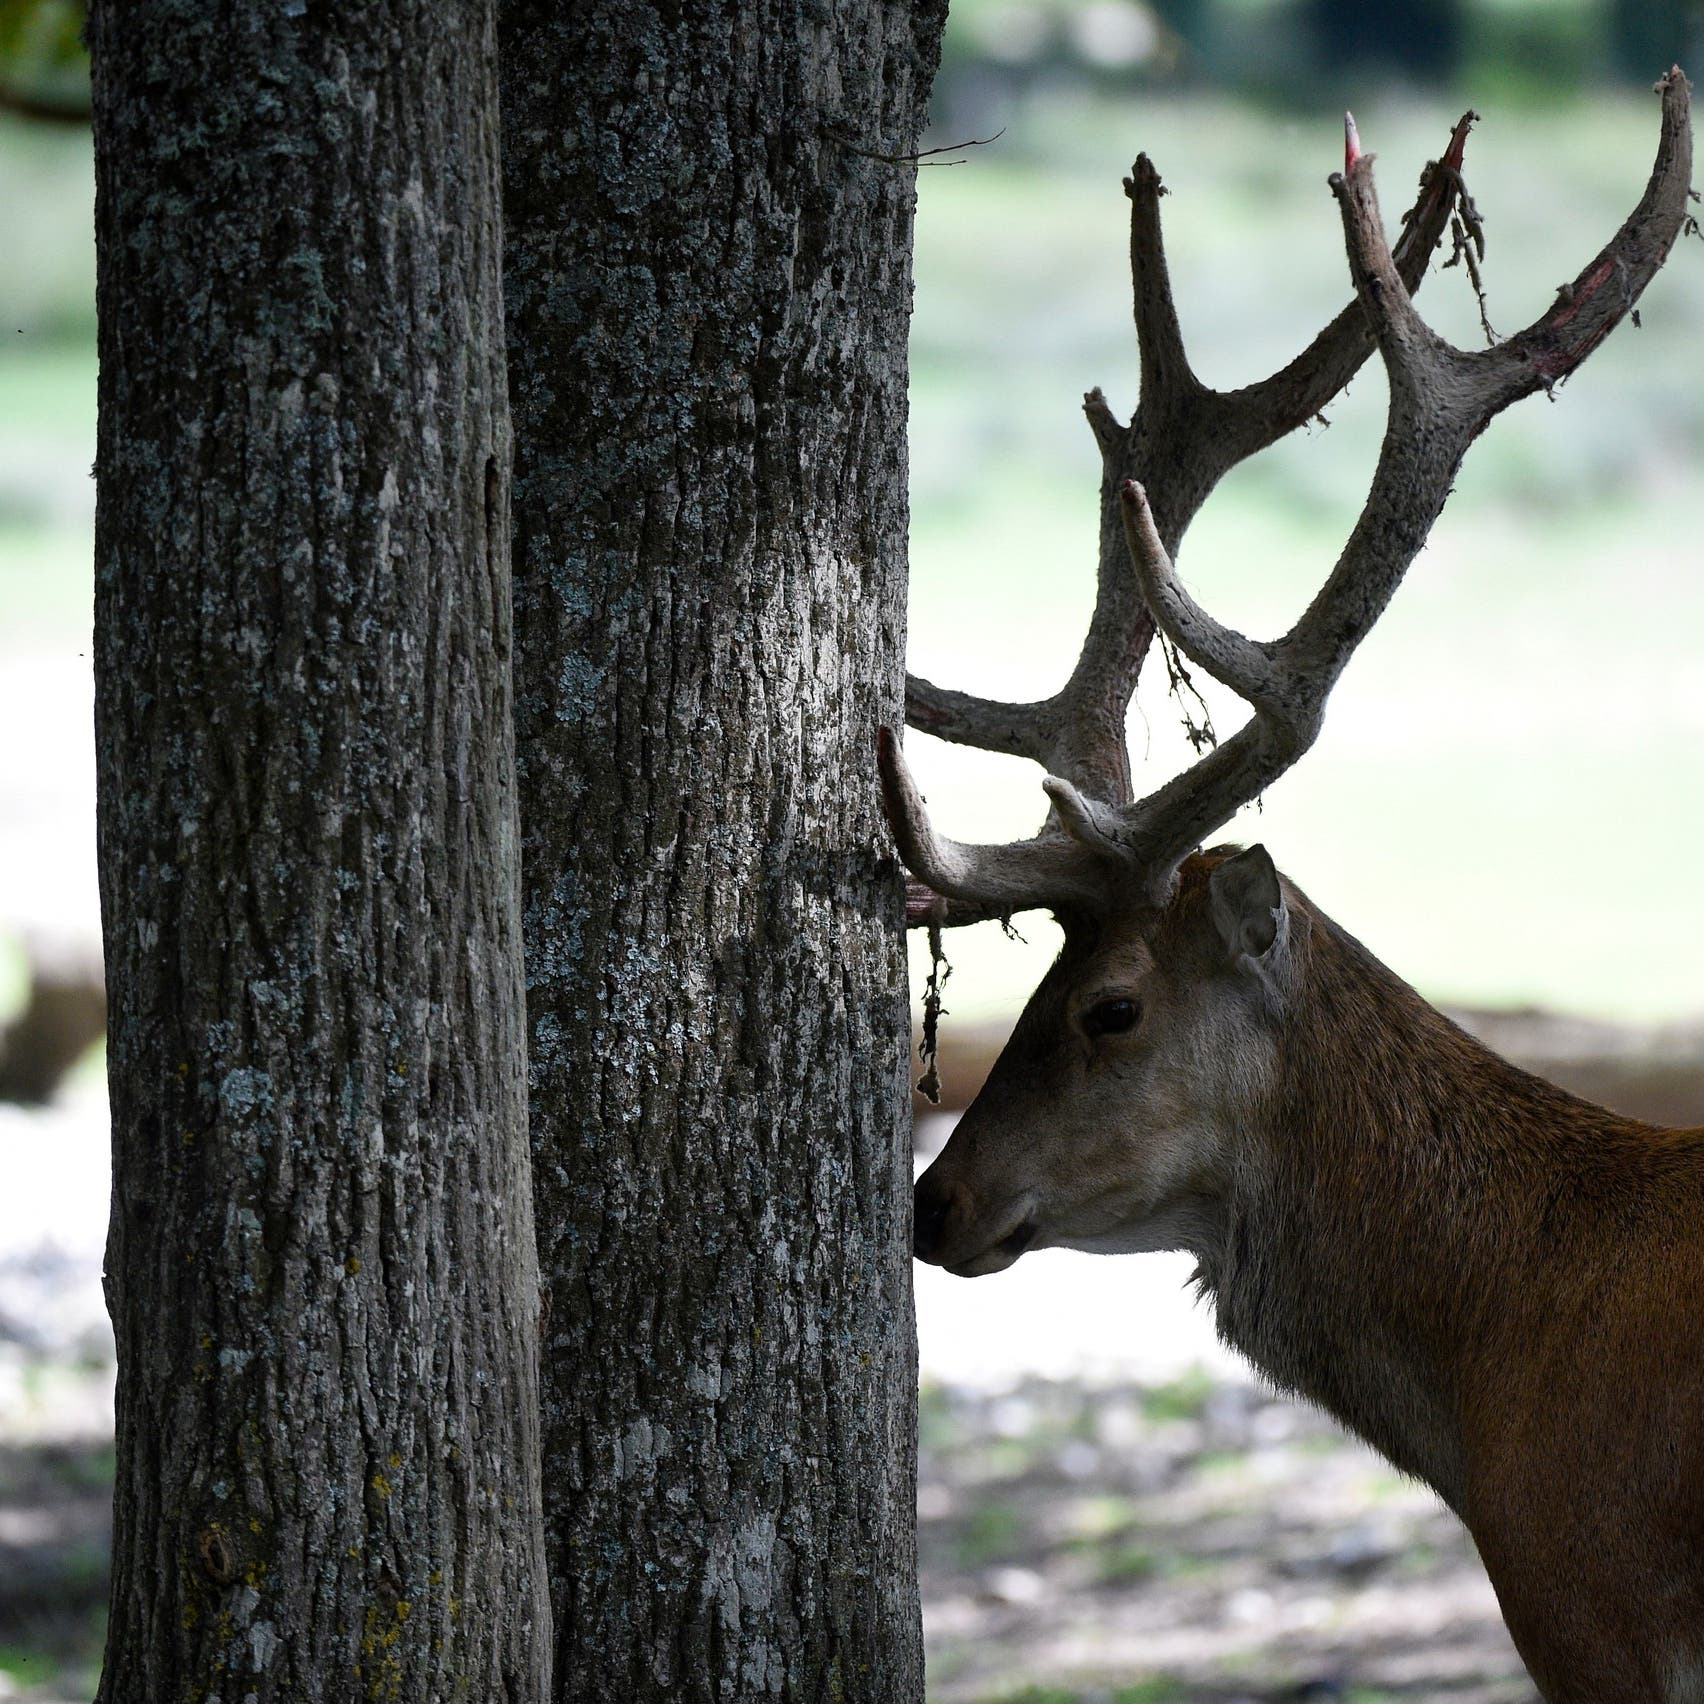 Significant portion of US deer population tested positive for COVID-19 antibodies